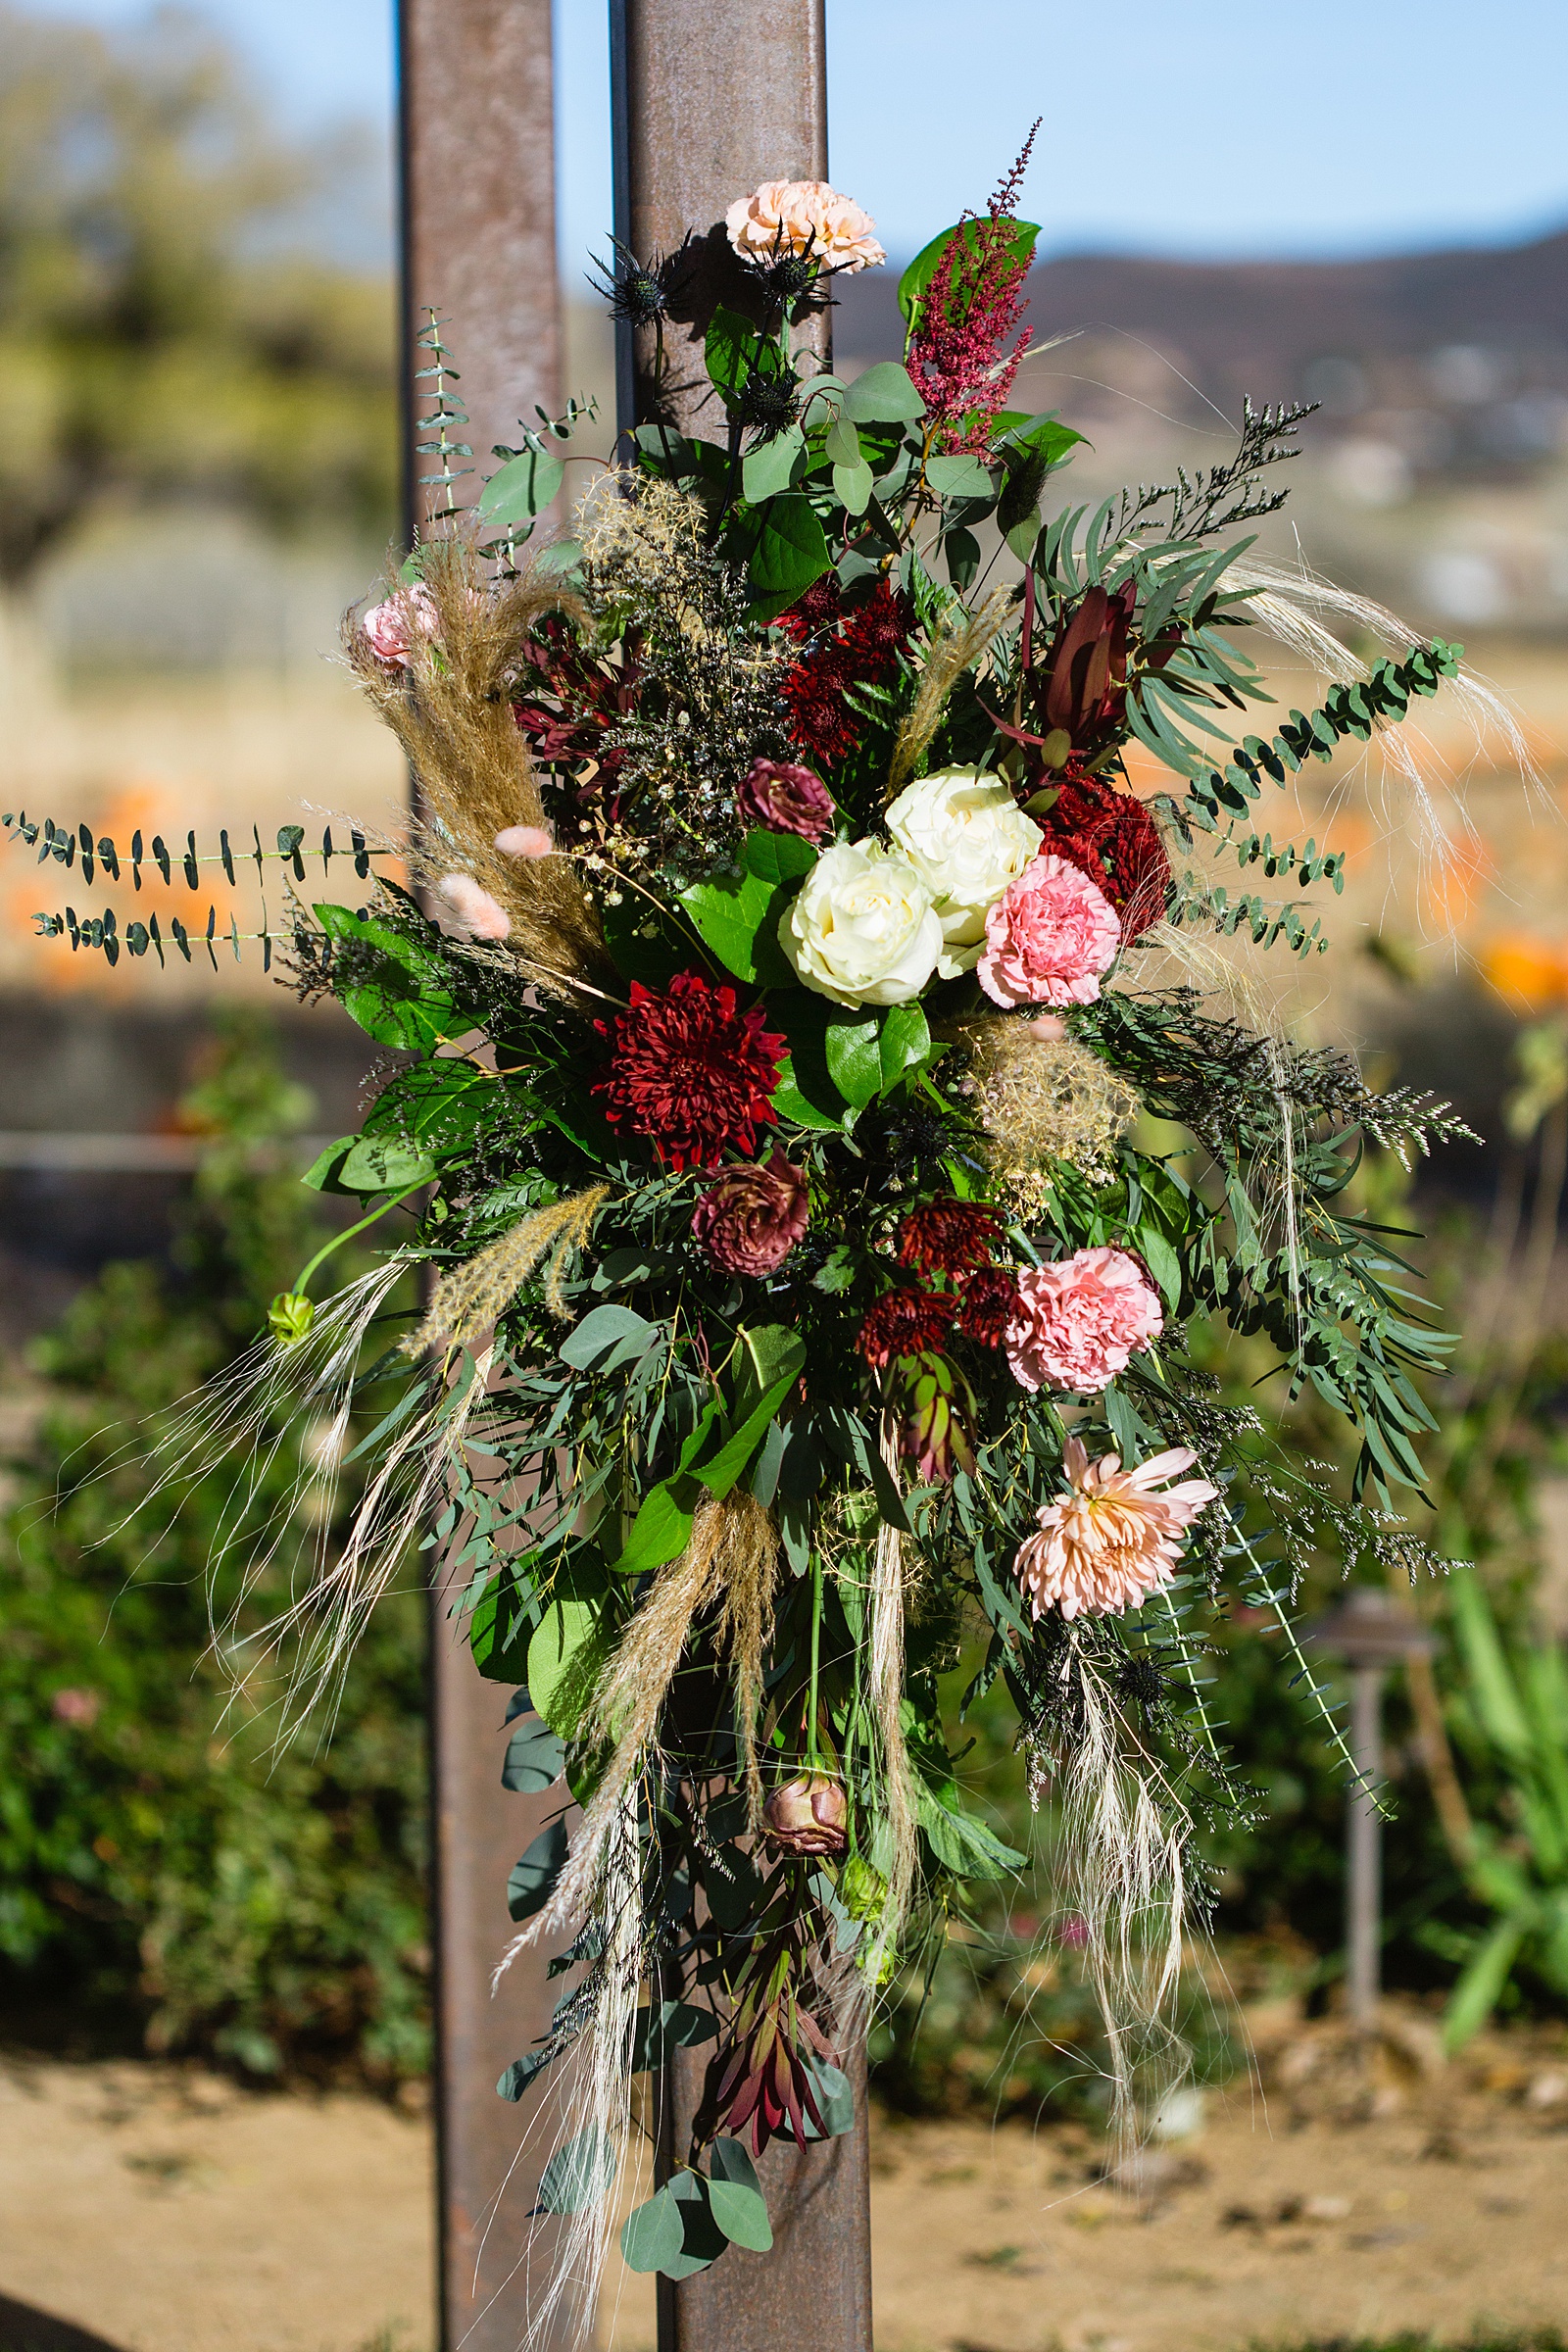 Flowers detail on ceremony arch at Mortimer Farms wedding reception by Prescott wedding photographer PMA Photography.